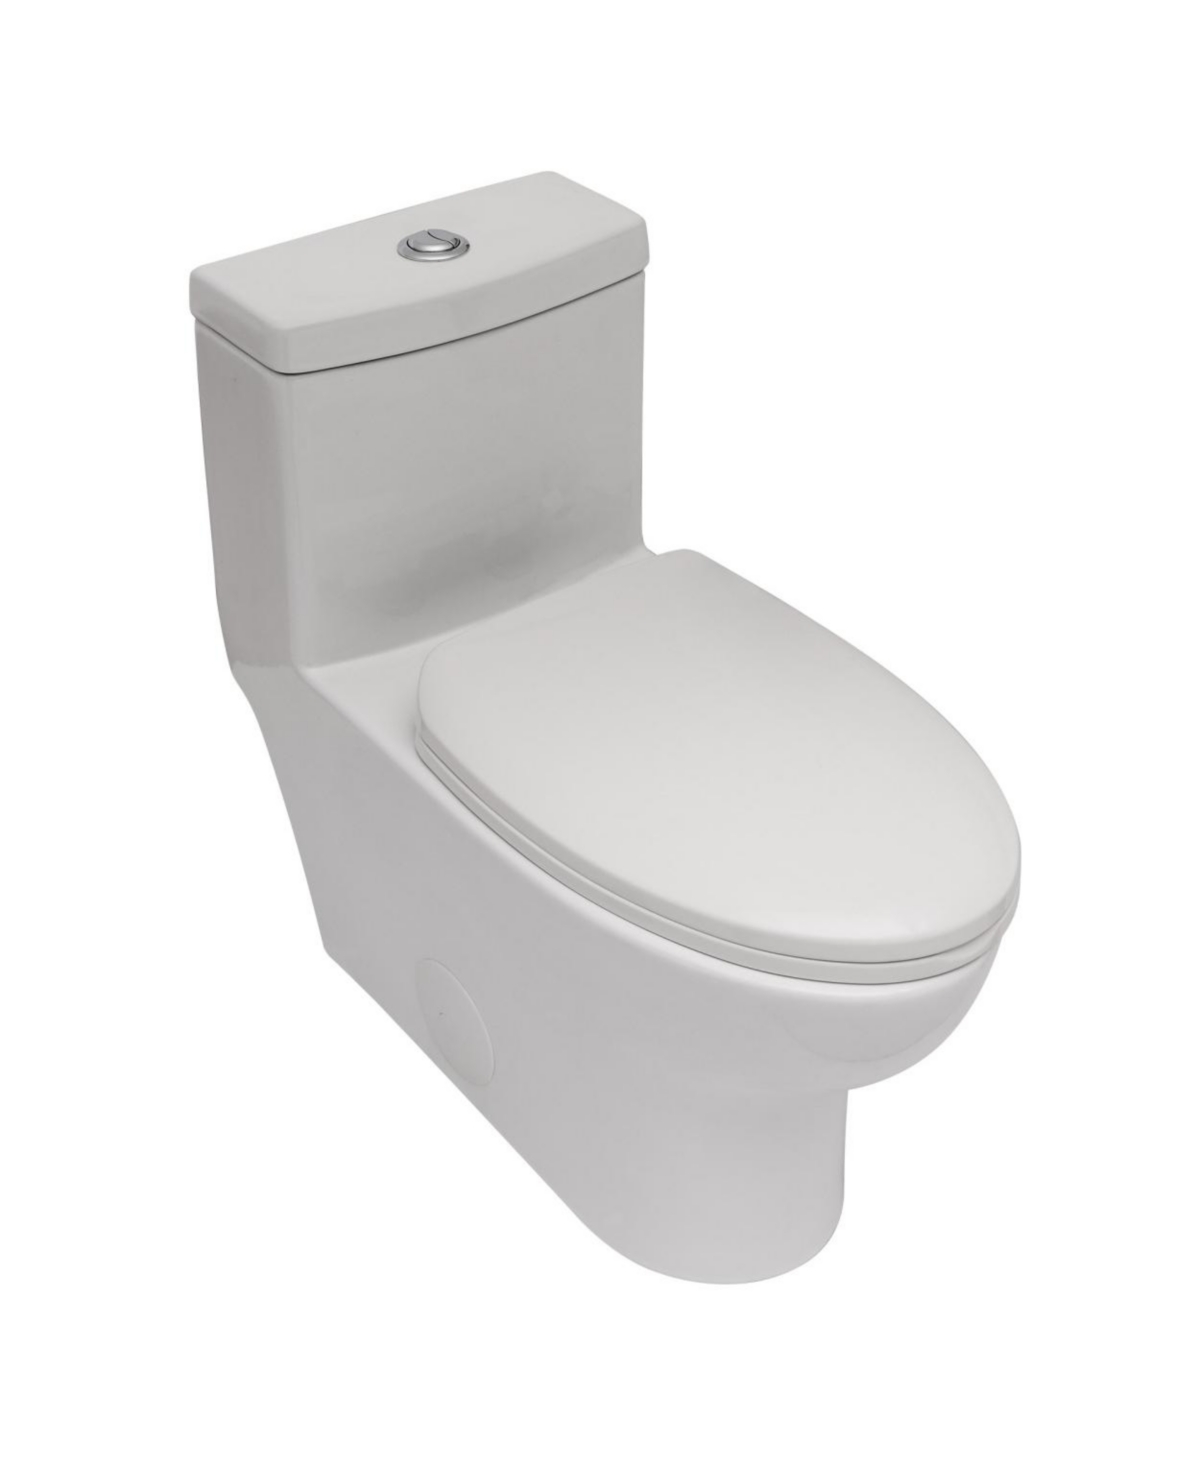 Ceramic One Piece Toilet, Dual Flush With Soft Closing Seat 0001 - White